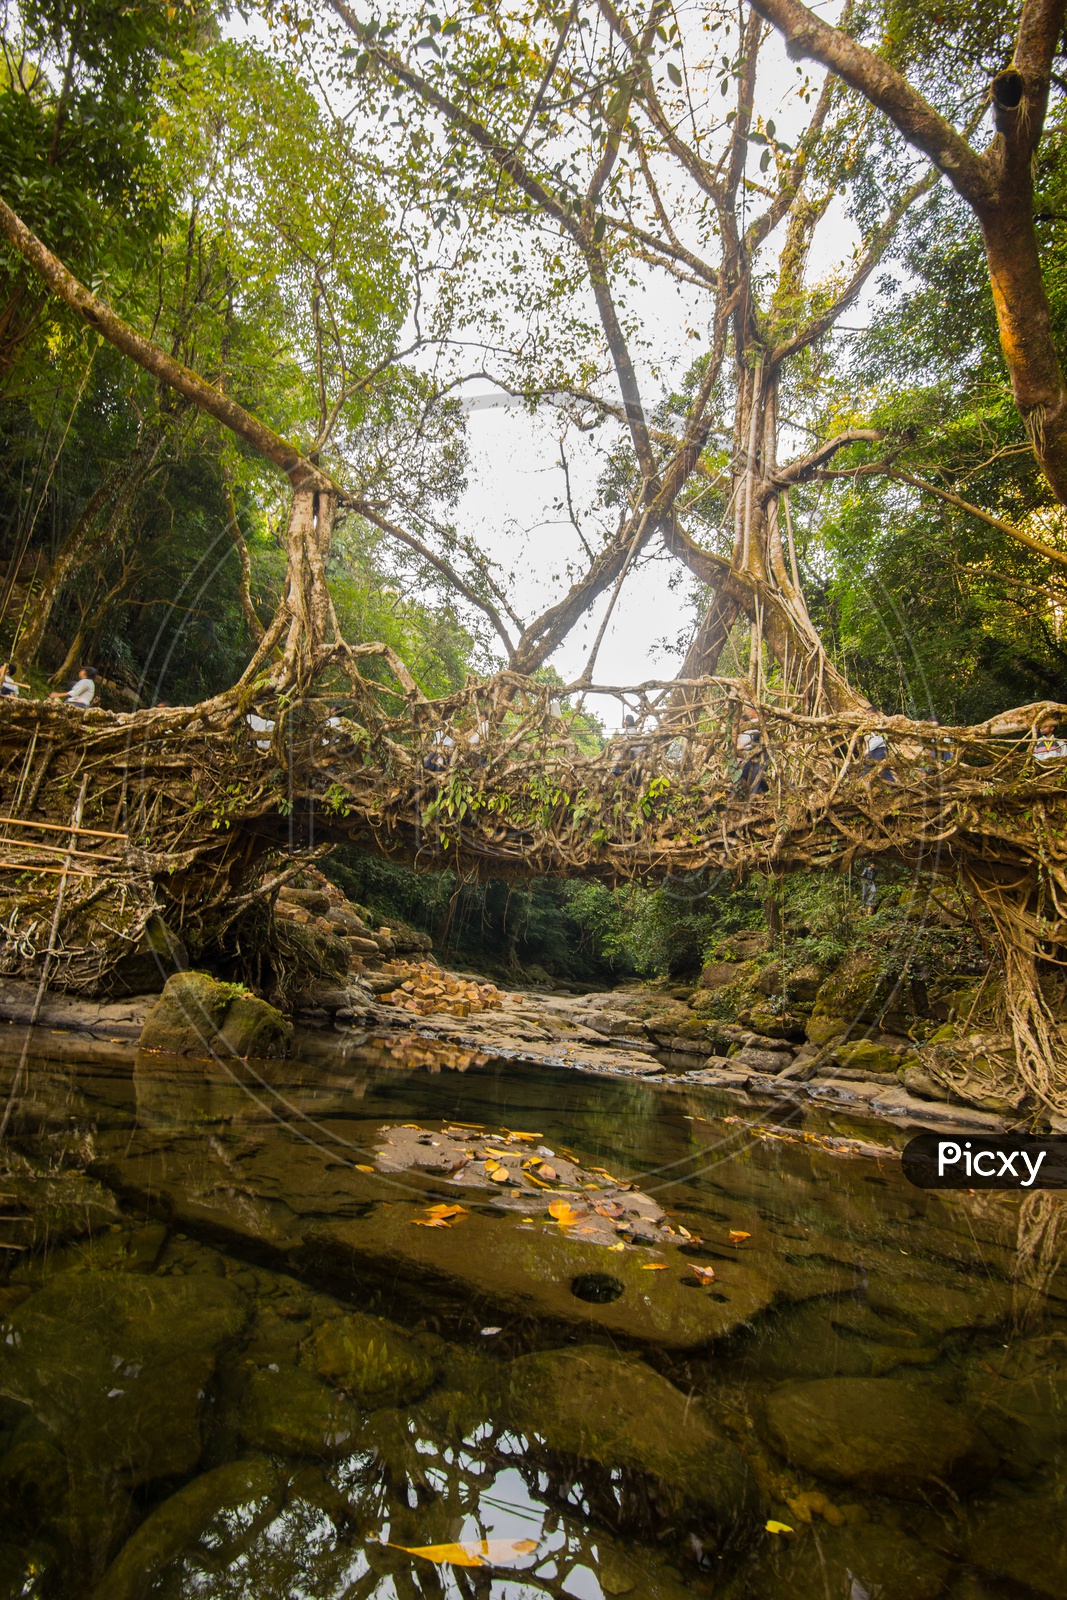 Naturally Formed Wild Tree Root Bridge In Forest